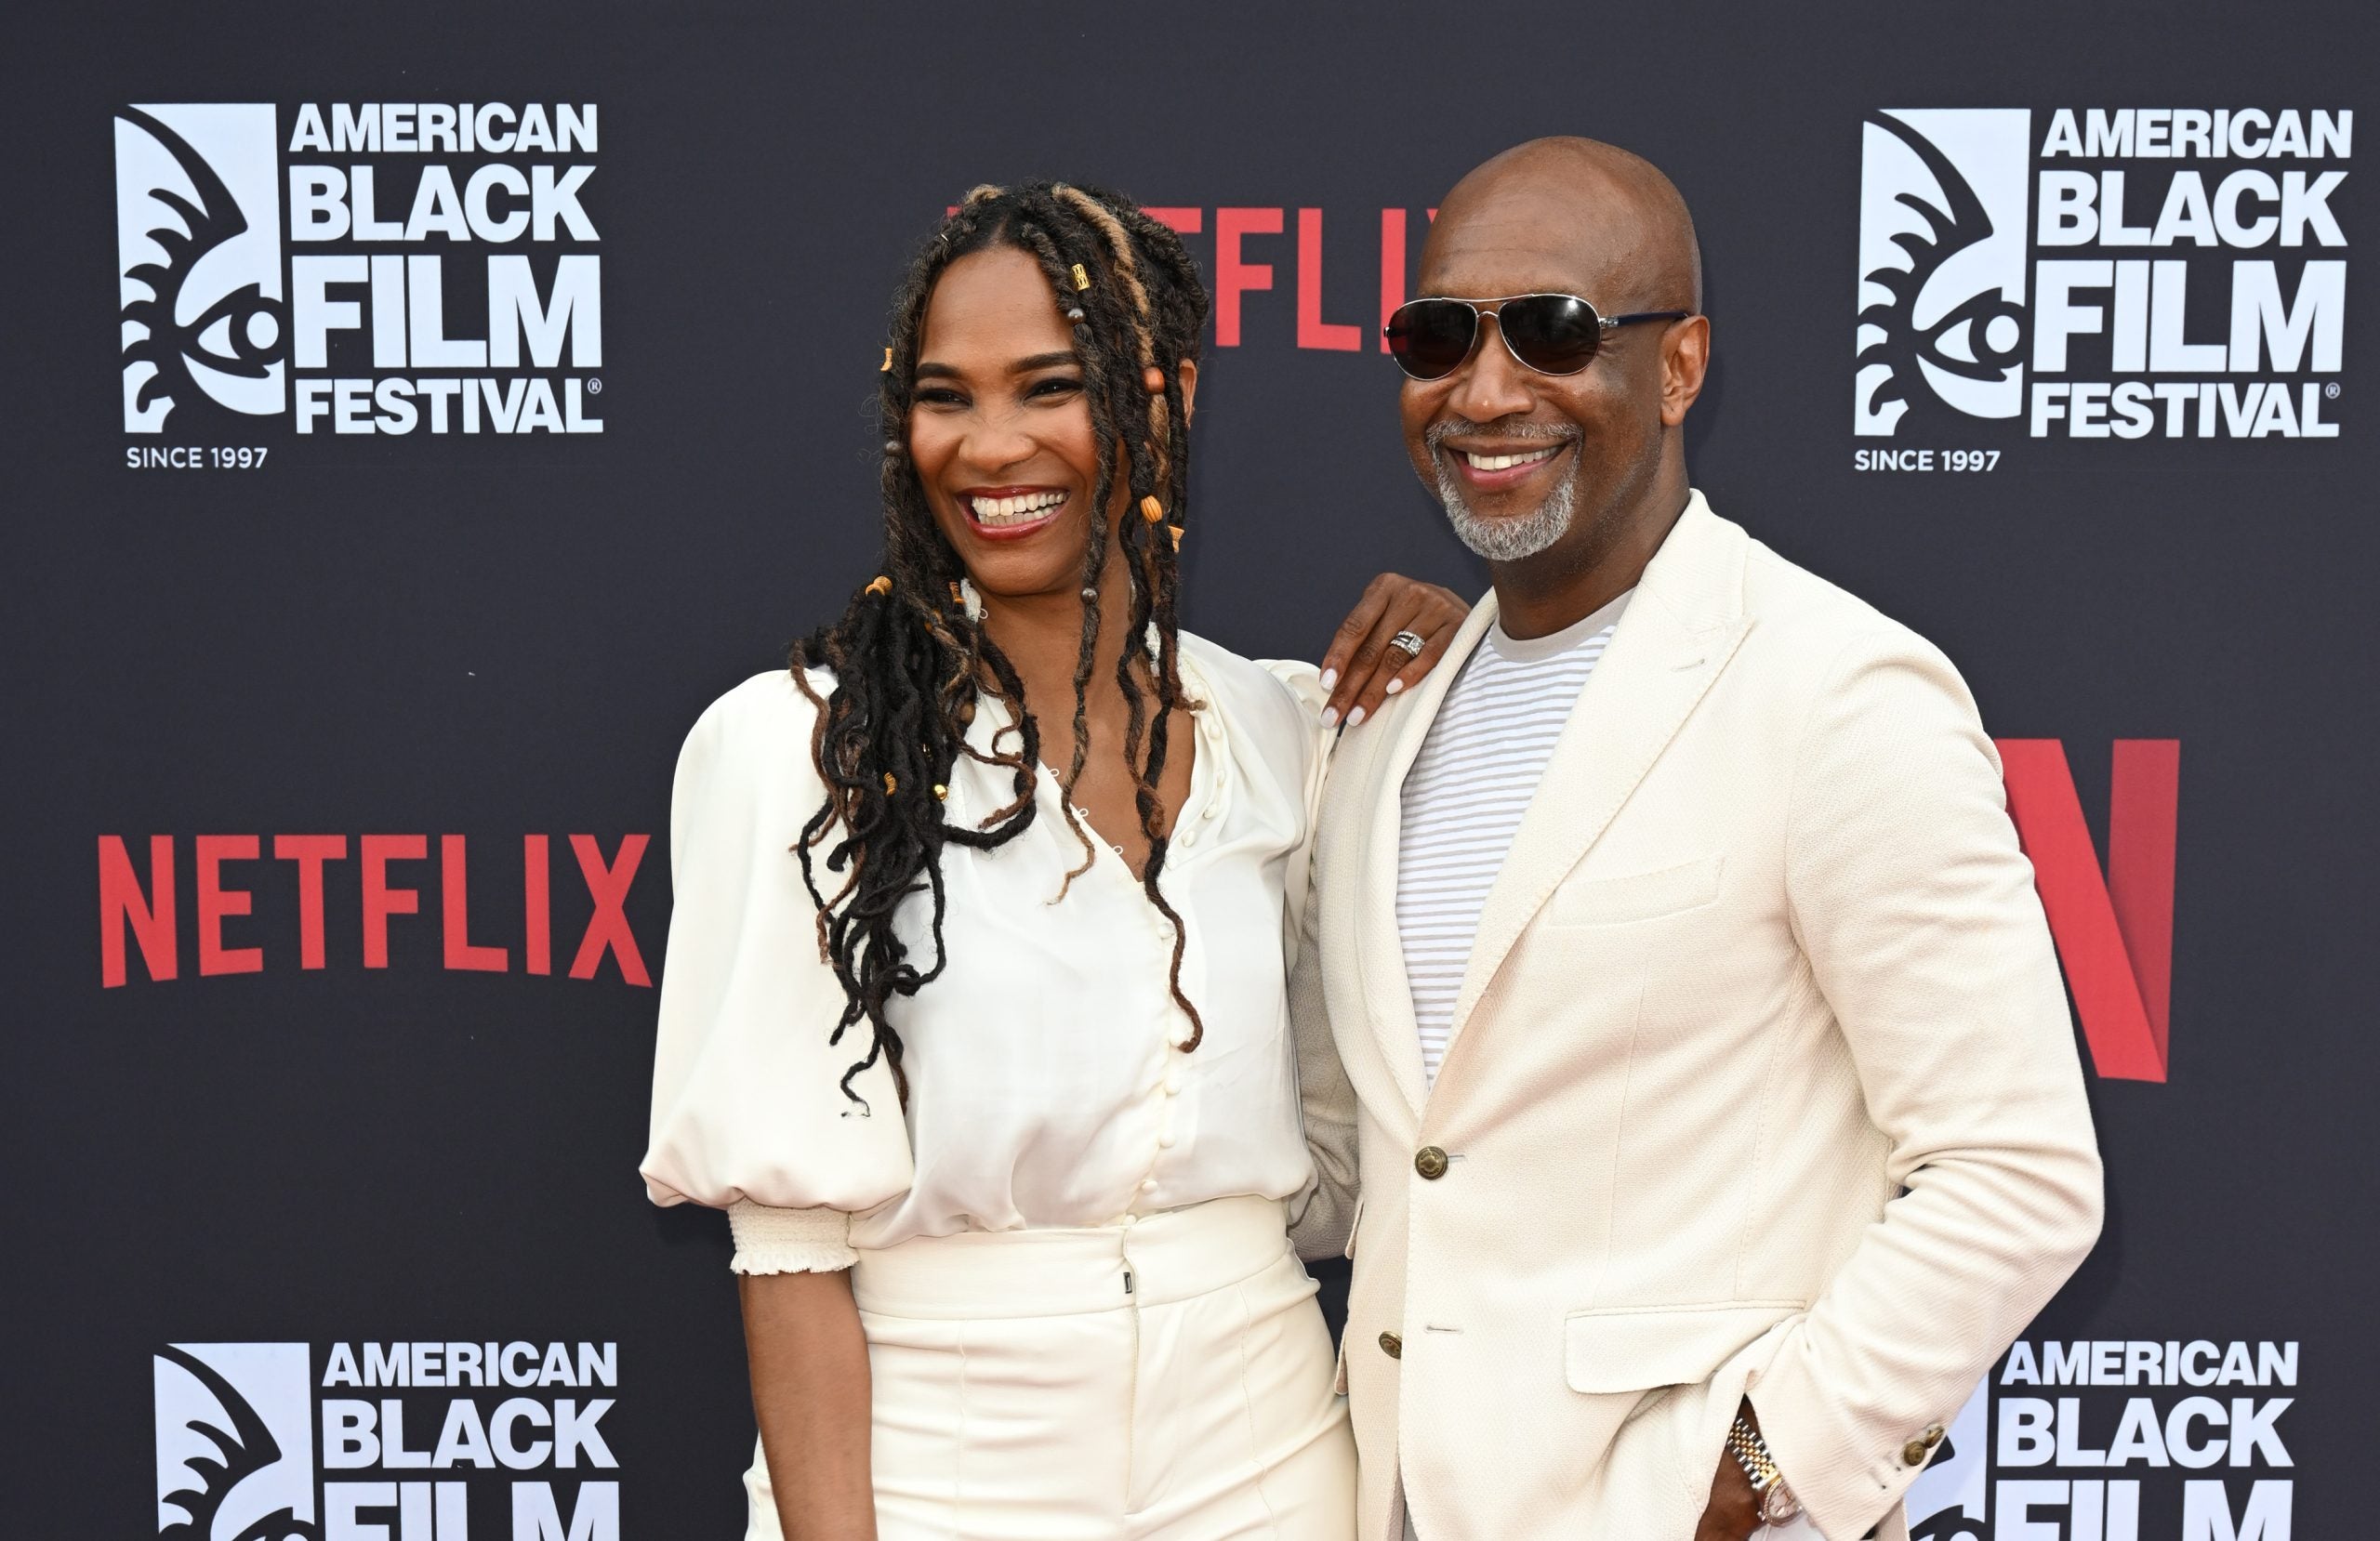 “Don’t Be Afraid To Give Black People Money”—The Founders Of The American Black Film Festival Discuss Investment In The Creator Community